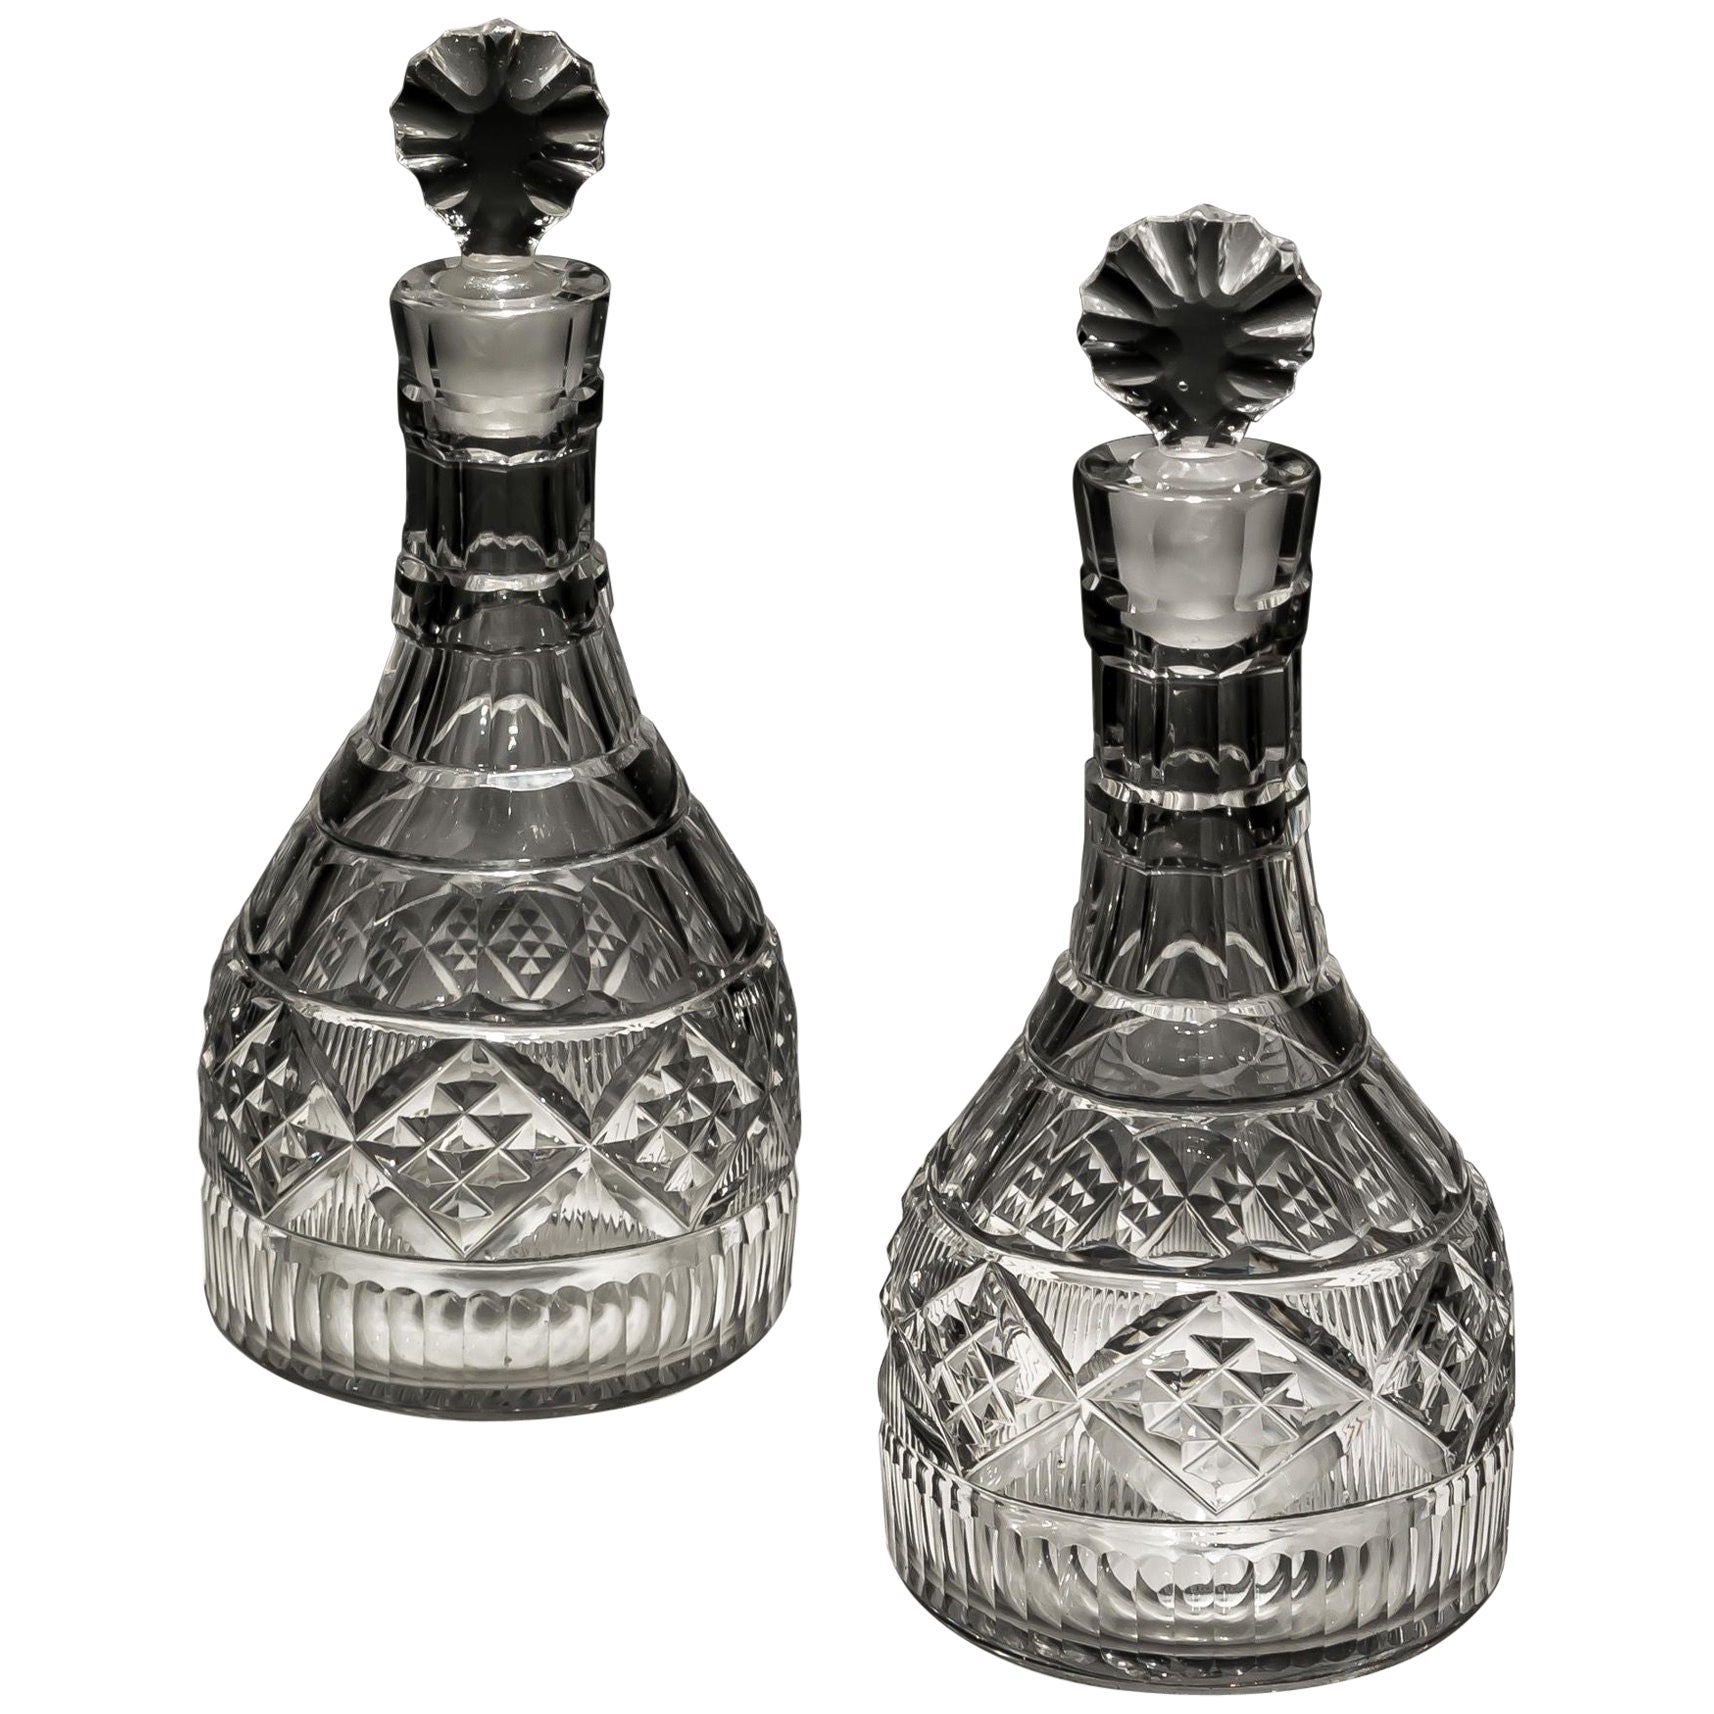 Unusual Pair of Irish Cut Glass Decanters For Sale